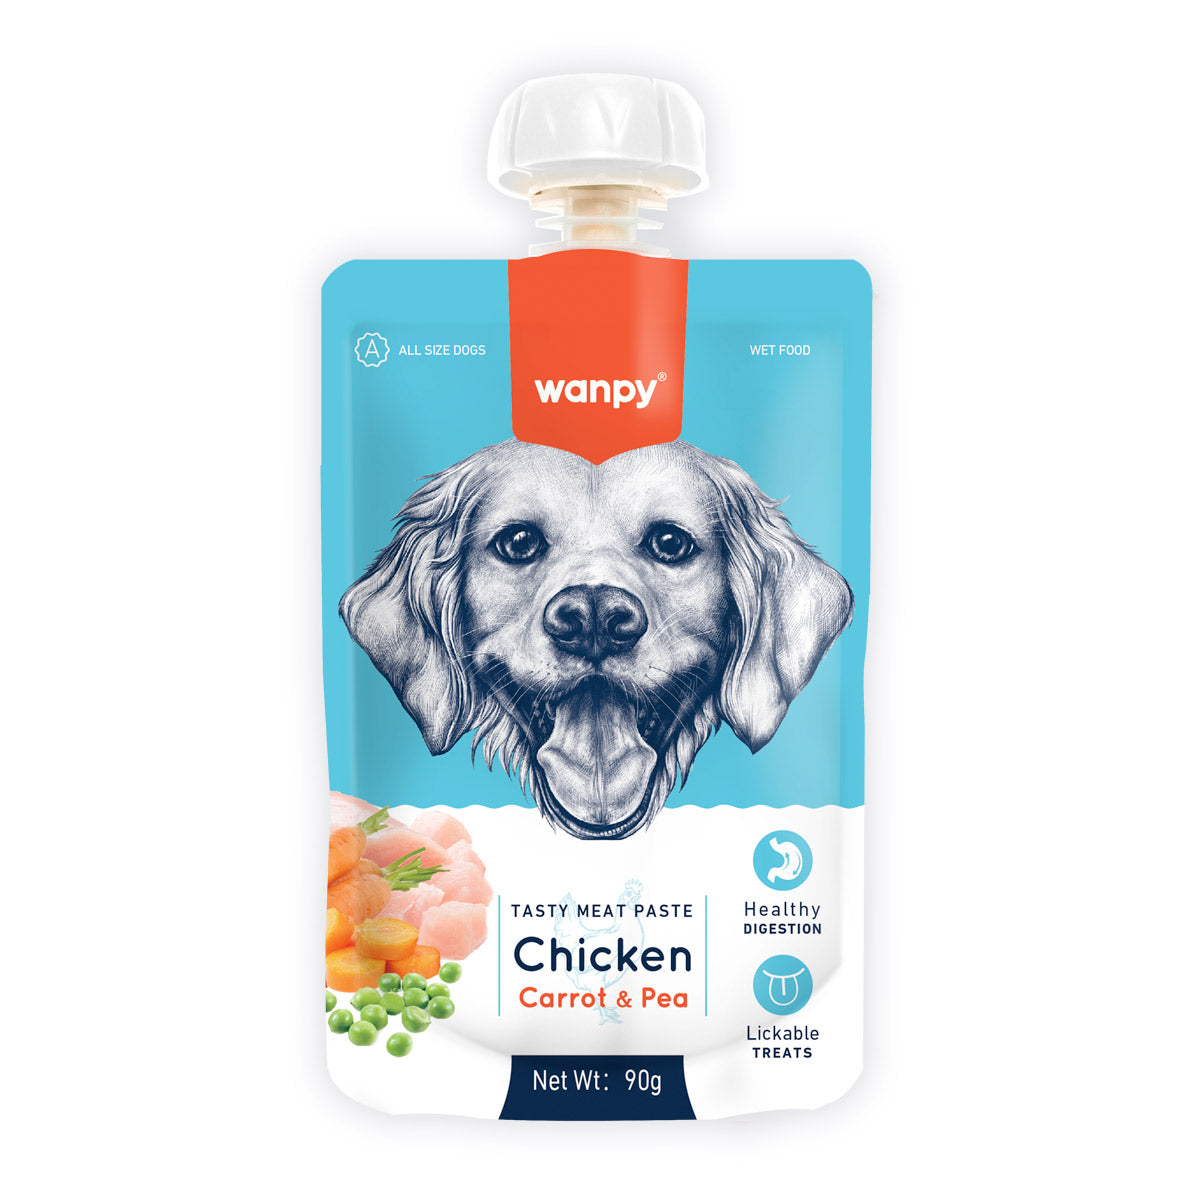 Wanpy Tasty Meat Paste Chicken with Carrot & Pea for Dogs 90g